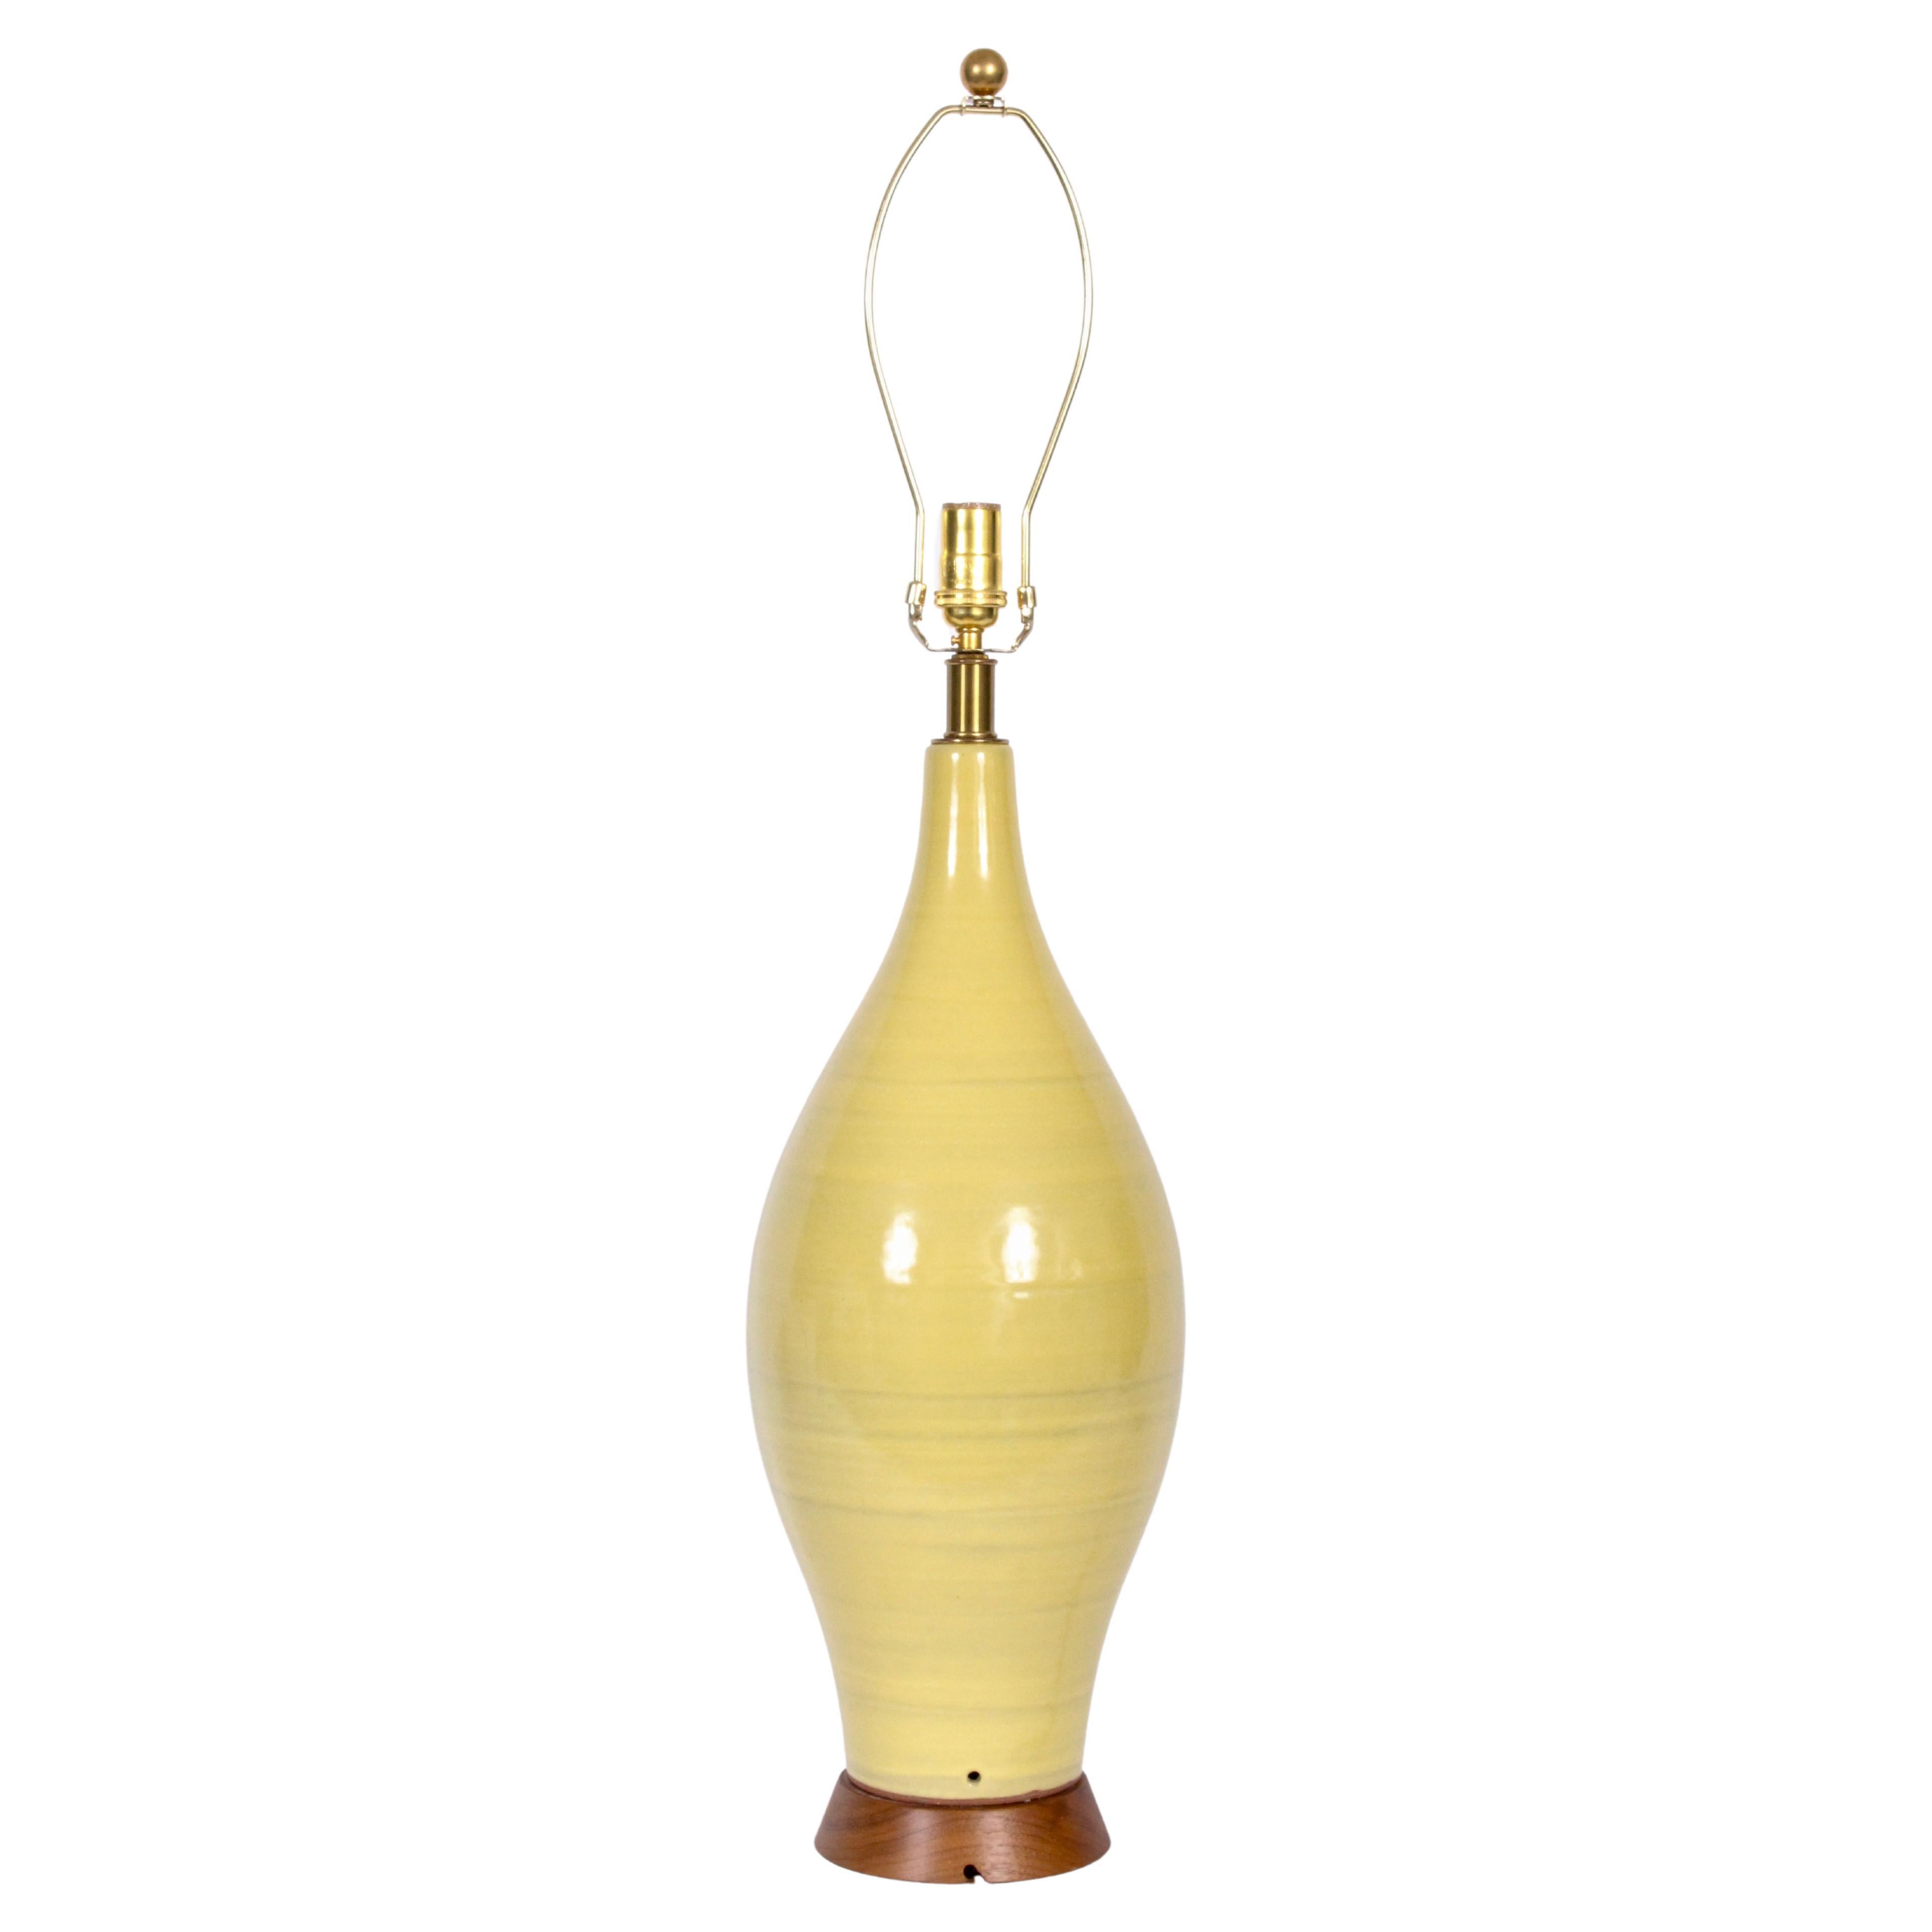 Substantial 3'H Design-Technics handcrafted Vibrant Yellow Pottery Lamp, 1960s.  Featuring the classic hand sculpted bottle form with vertical banding and reflective glossy glaze on solid flared walnut base. 28 H to top of socket. Ceramic 22.5 H.